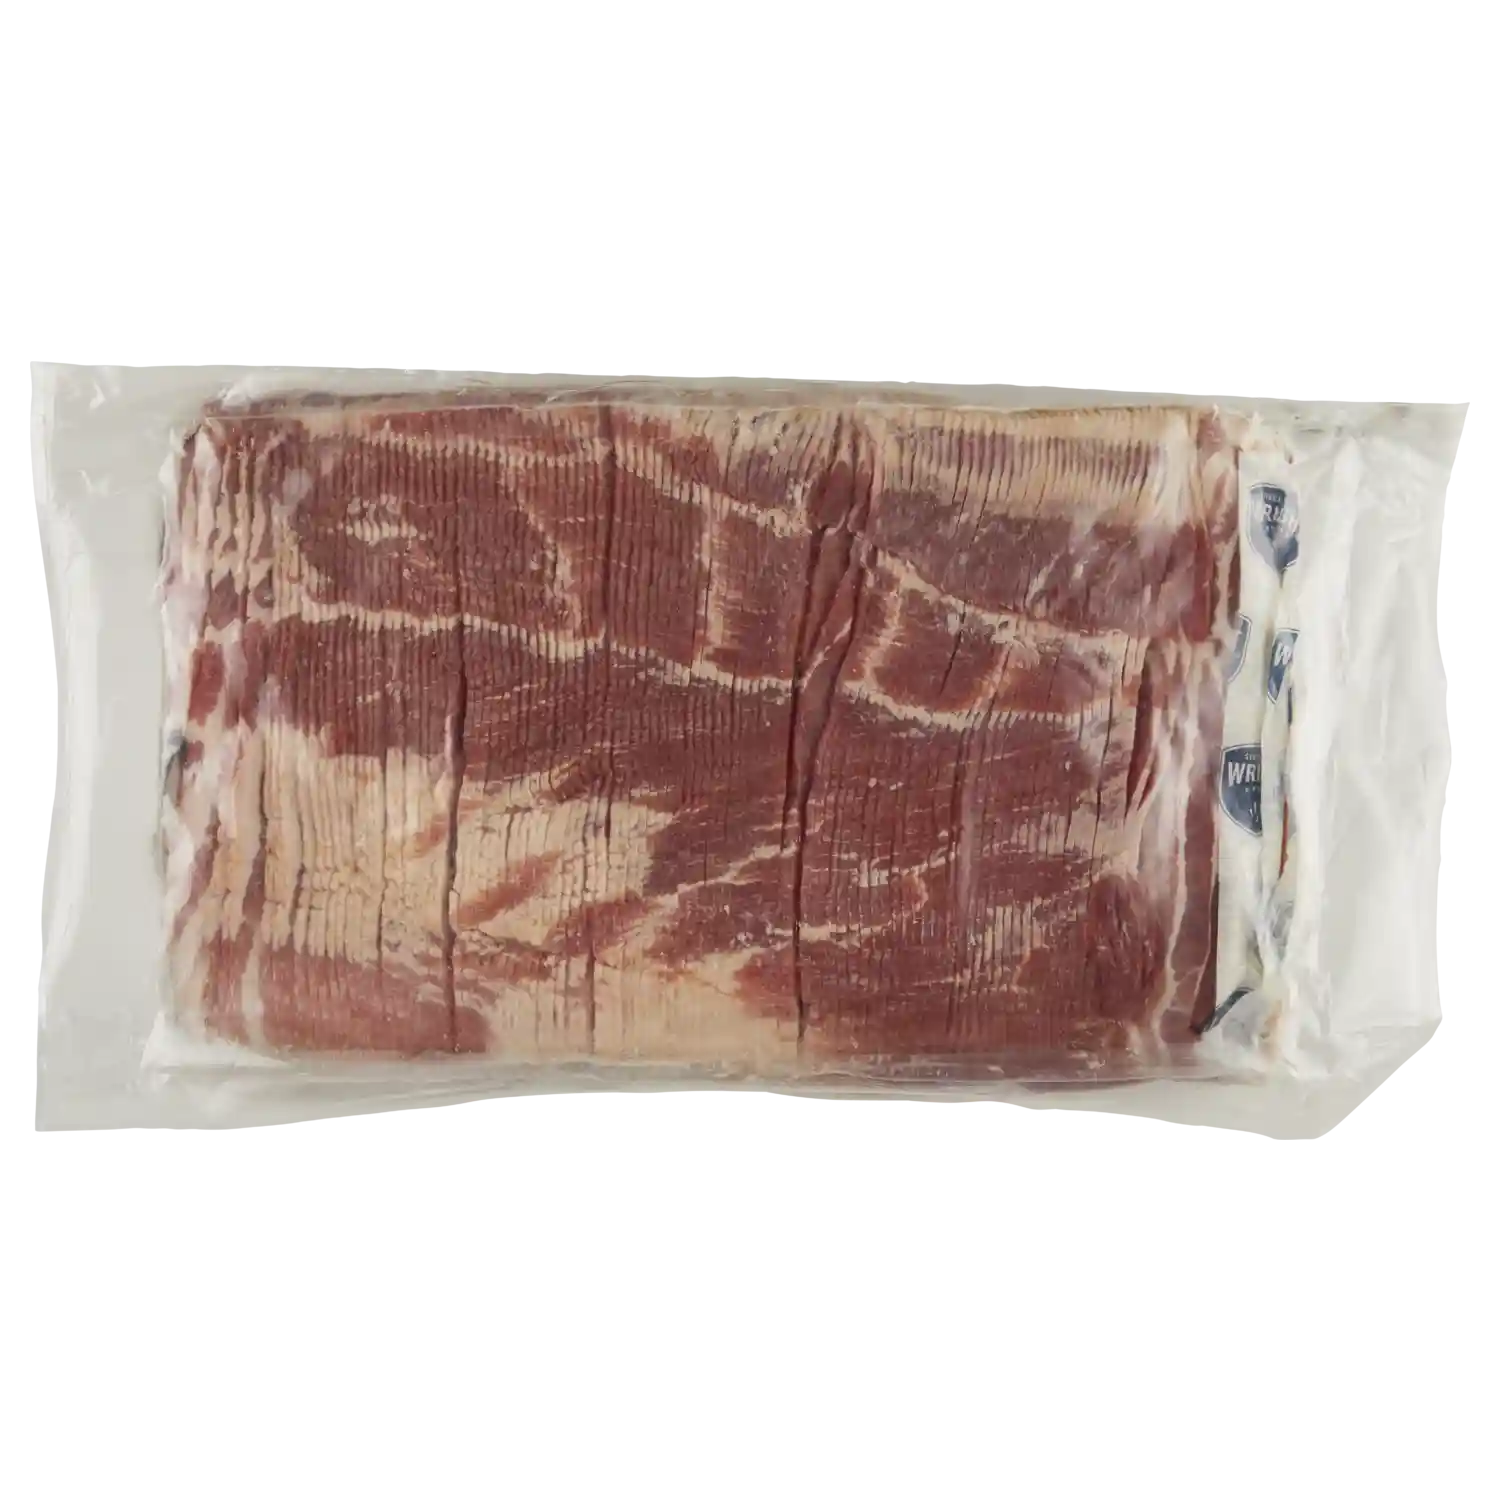 Wright® Brand Naturally Applewood Smoked Thick Sliced Bacon, Bulk, 10-14 Slices per Pound, Gas Flushed_image_31